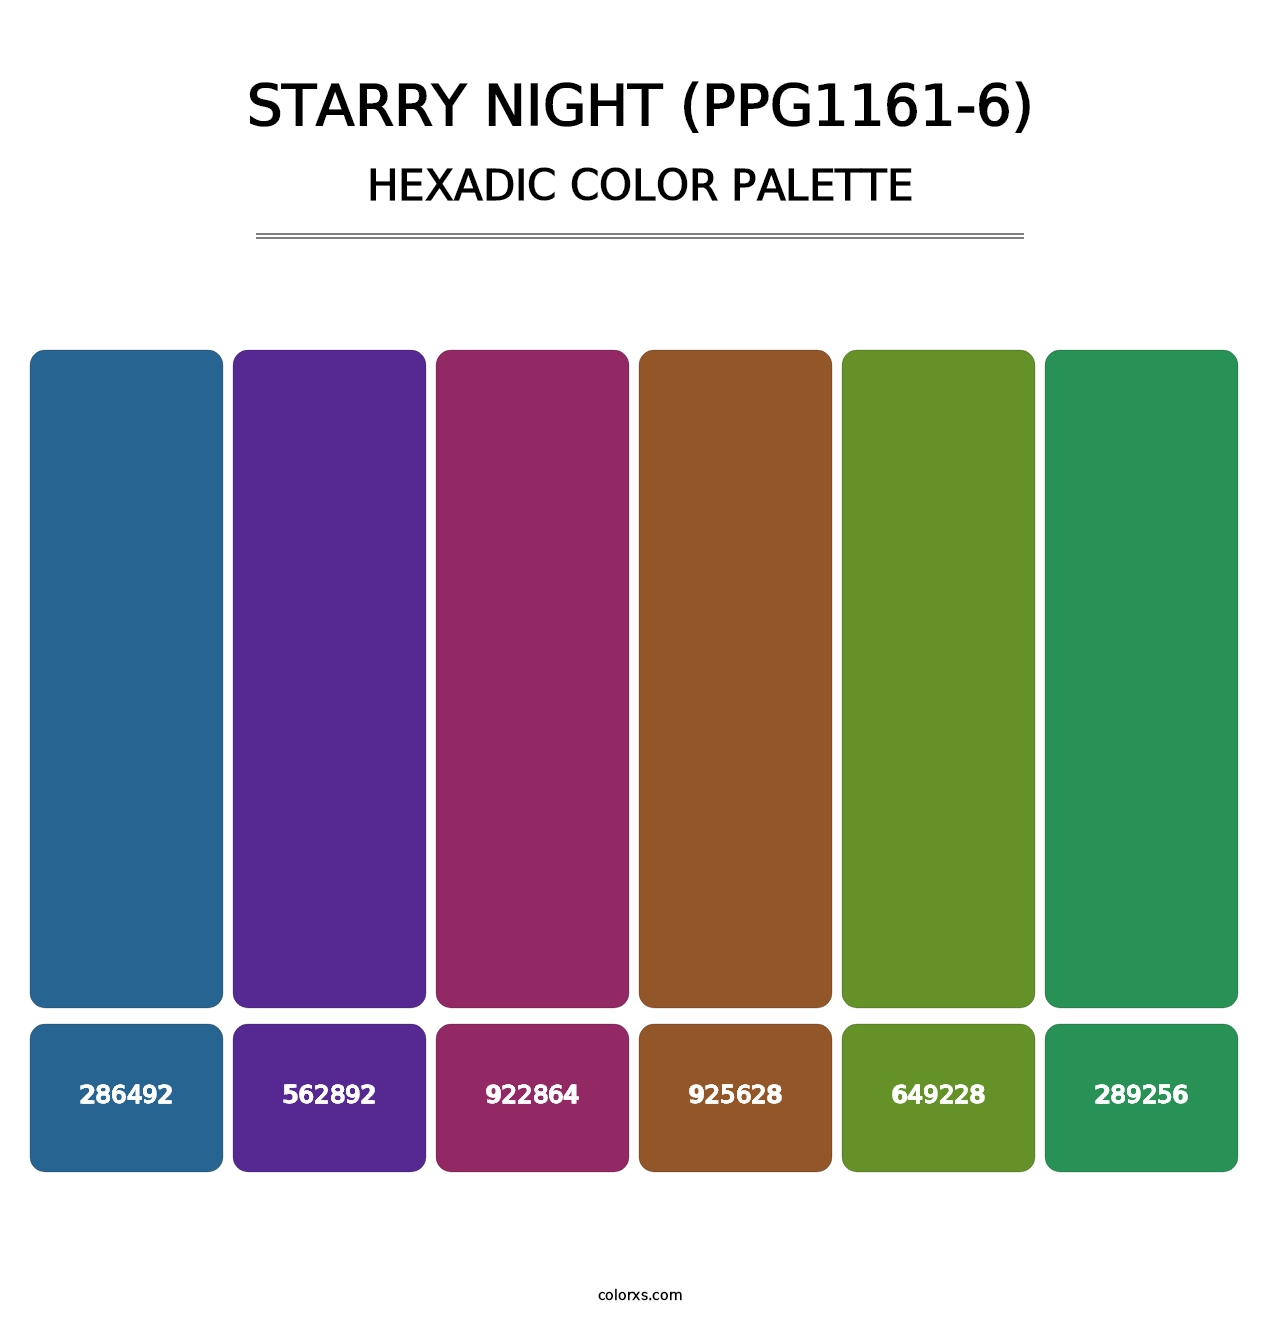 Starry Night (PPG1161-6) - Hexadic Color Palette